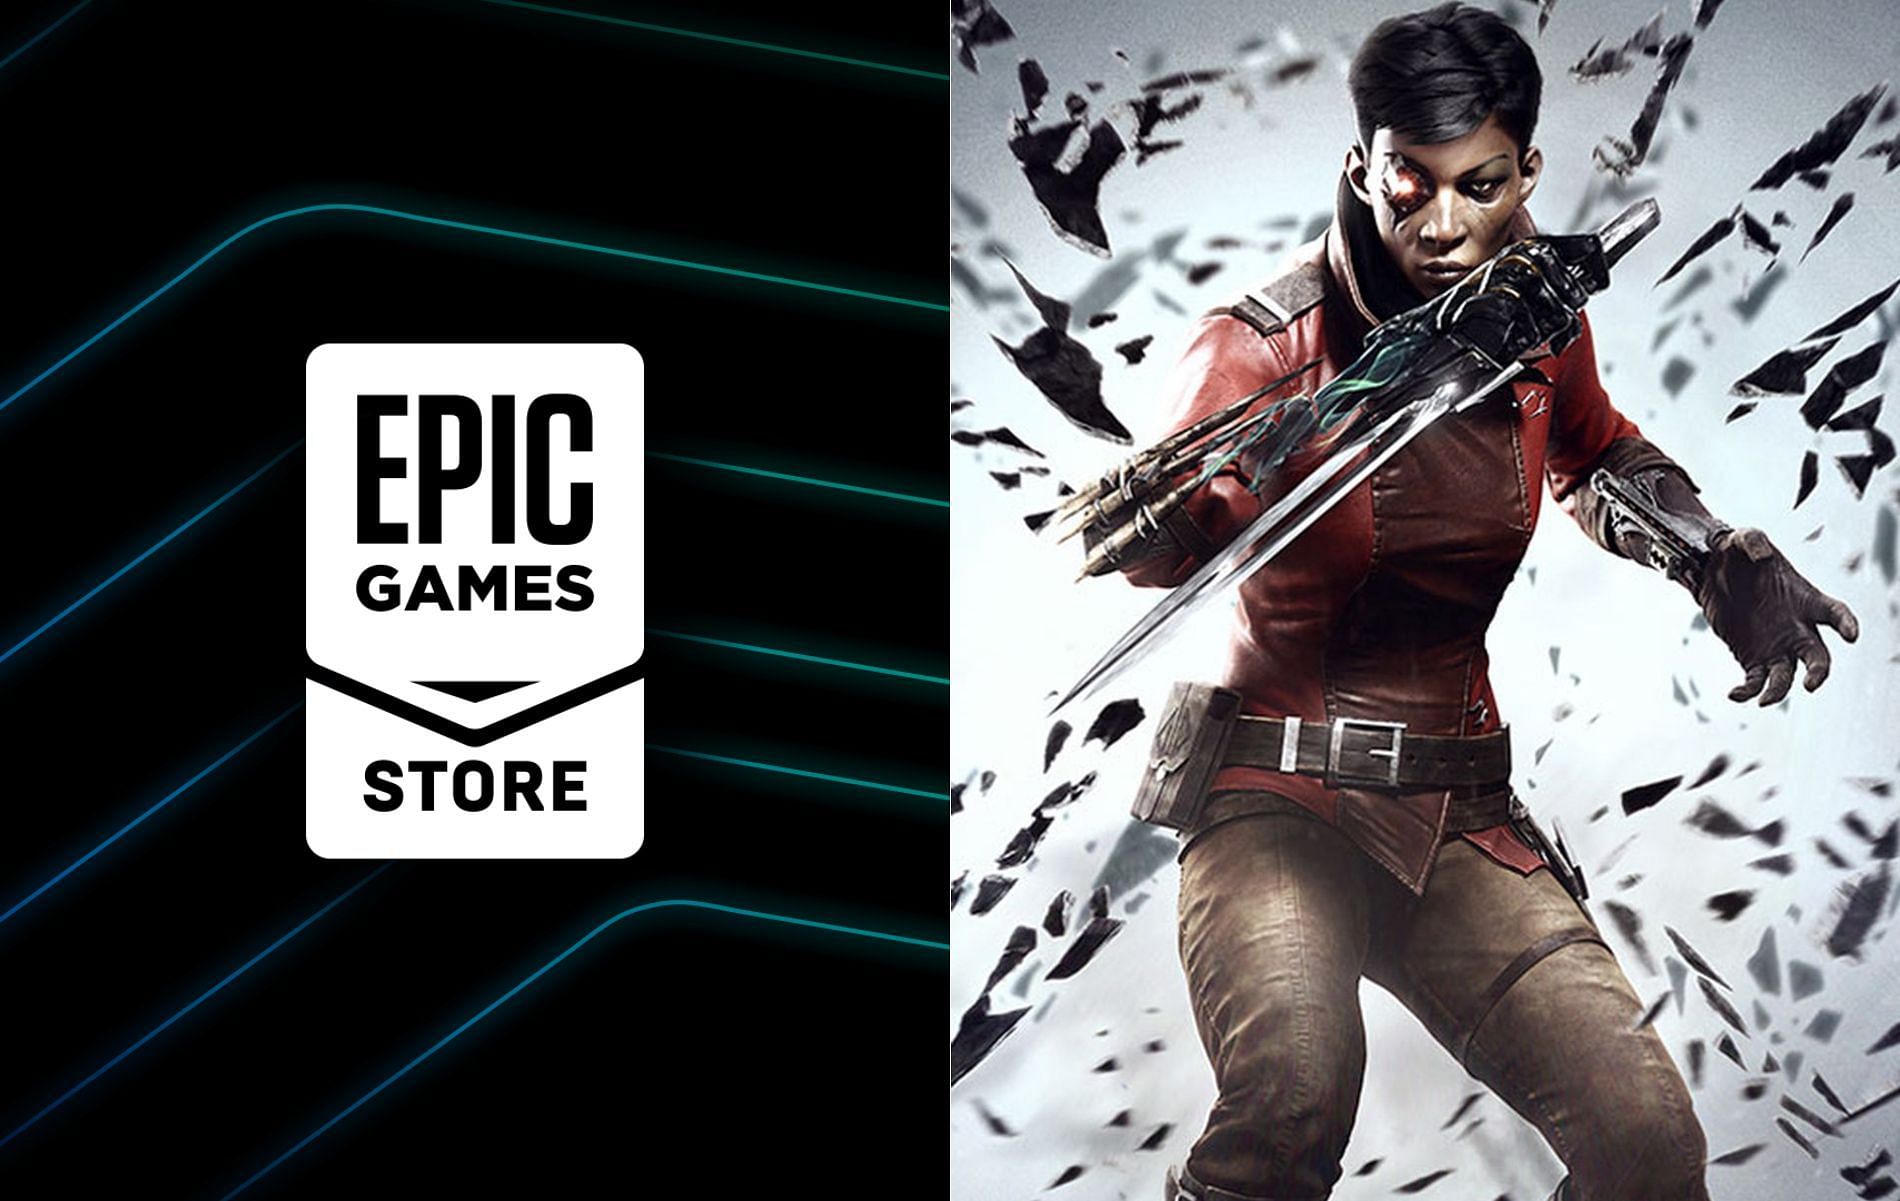 The latest installment from one of the best stealth franchises of the past decade is the latest freebie on the Epic Games Store (Images via Epic Games/Bethesda Softworks)